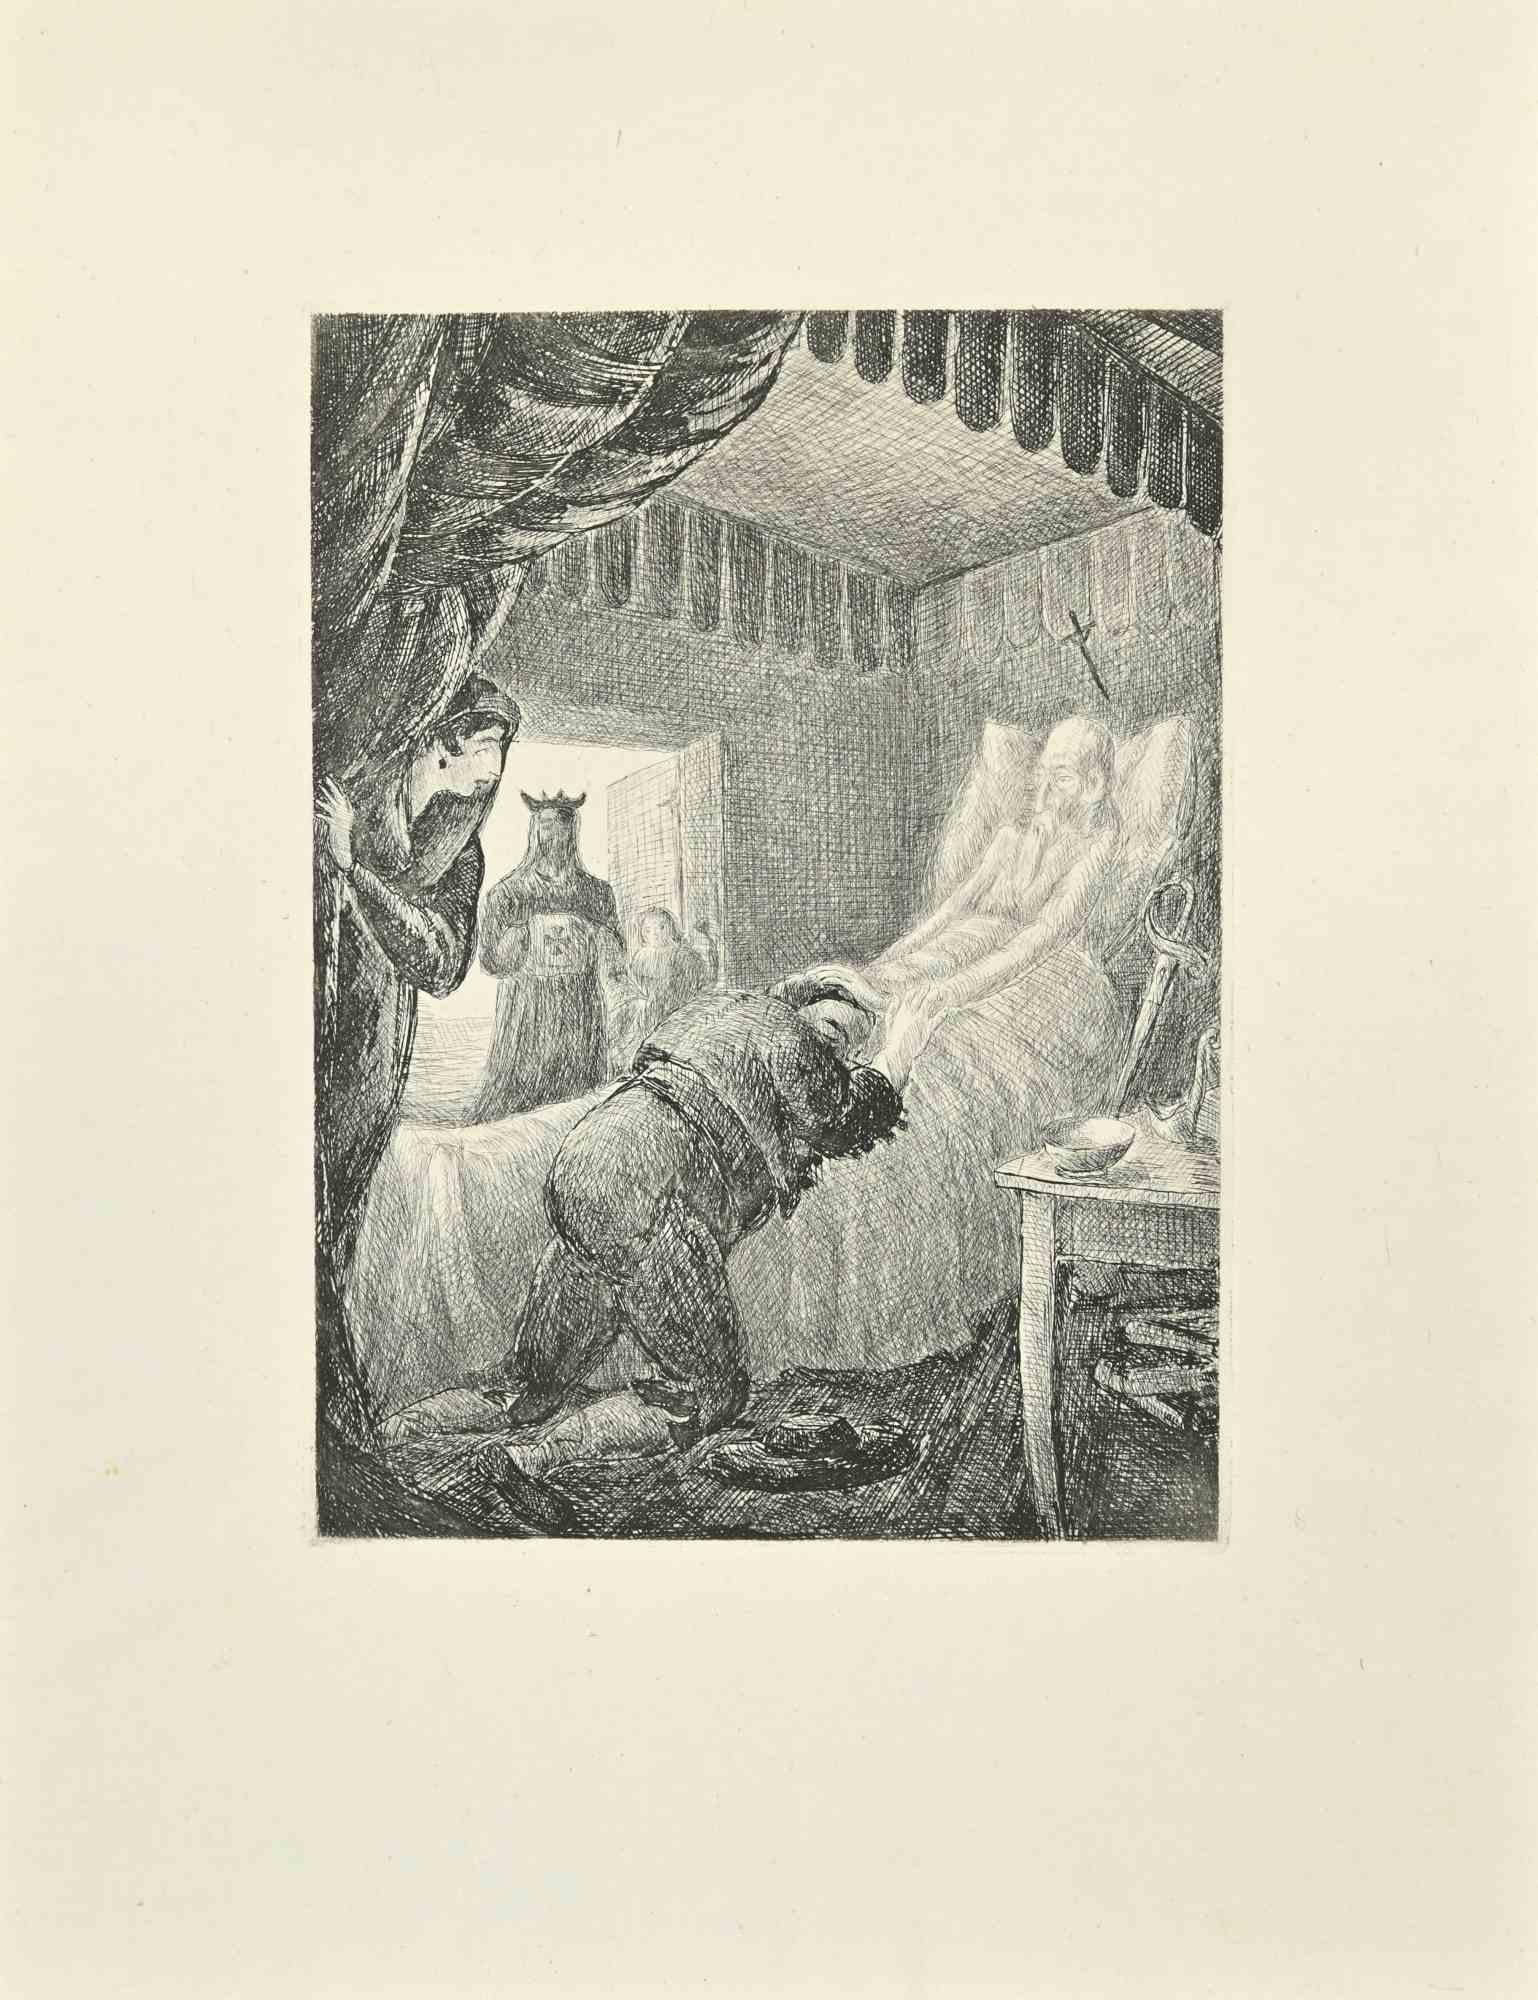 Don Quixote in The Bed is an etching and drypoint print on ivory-colored Chinese paper, realized by Wladyslaw Jahl in 1951.

It belongs to a limited edition of 125 specimens.

Good conditions with slight folding of paper.

The artwork represents a